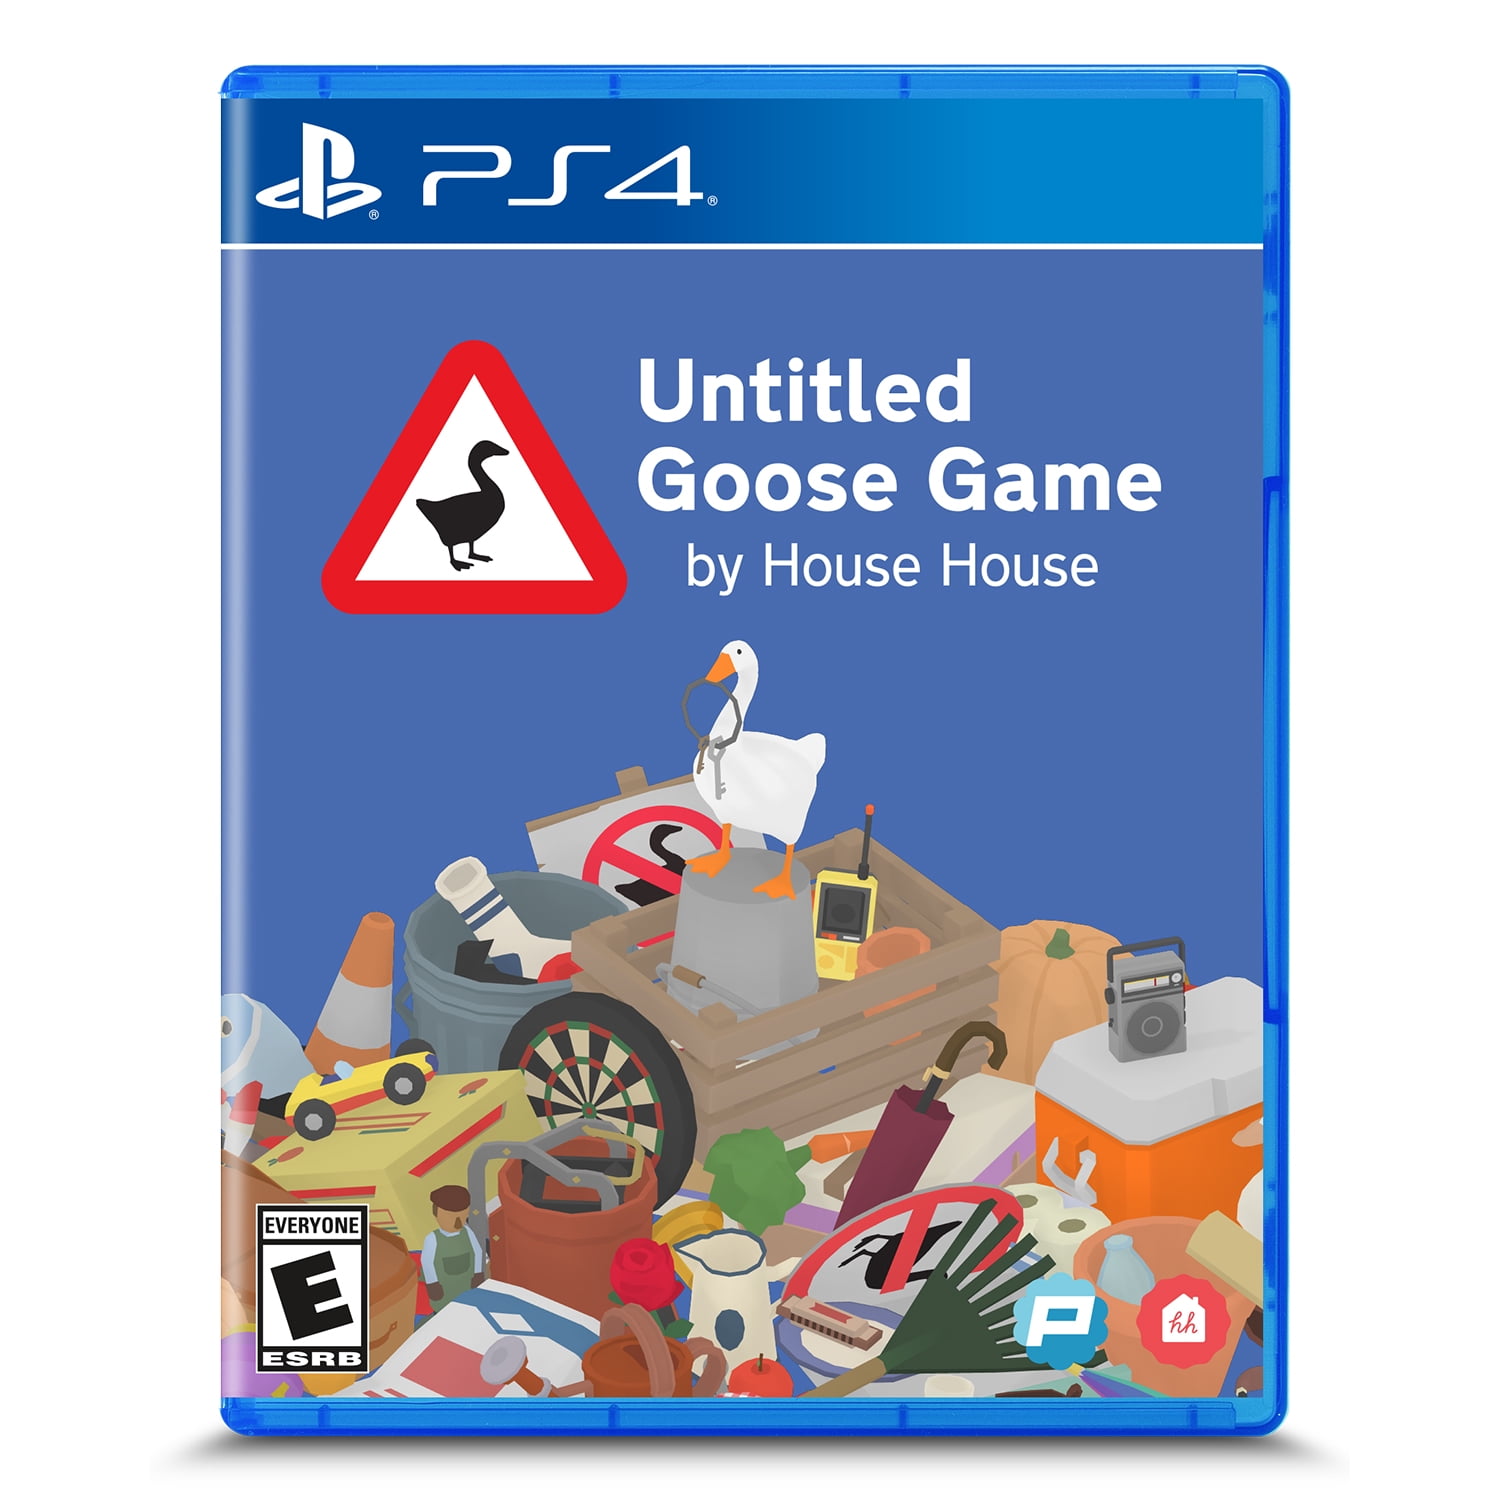 Untitled Goose Game, House House, Skybound Games, PlayStation - Walmart.com